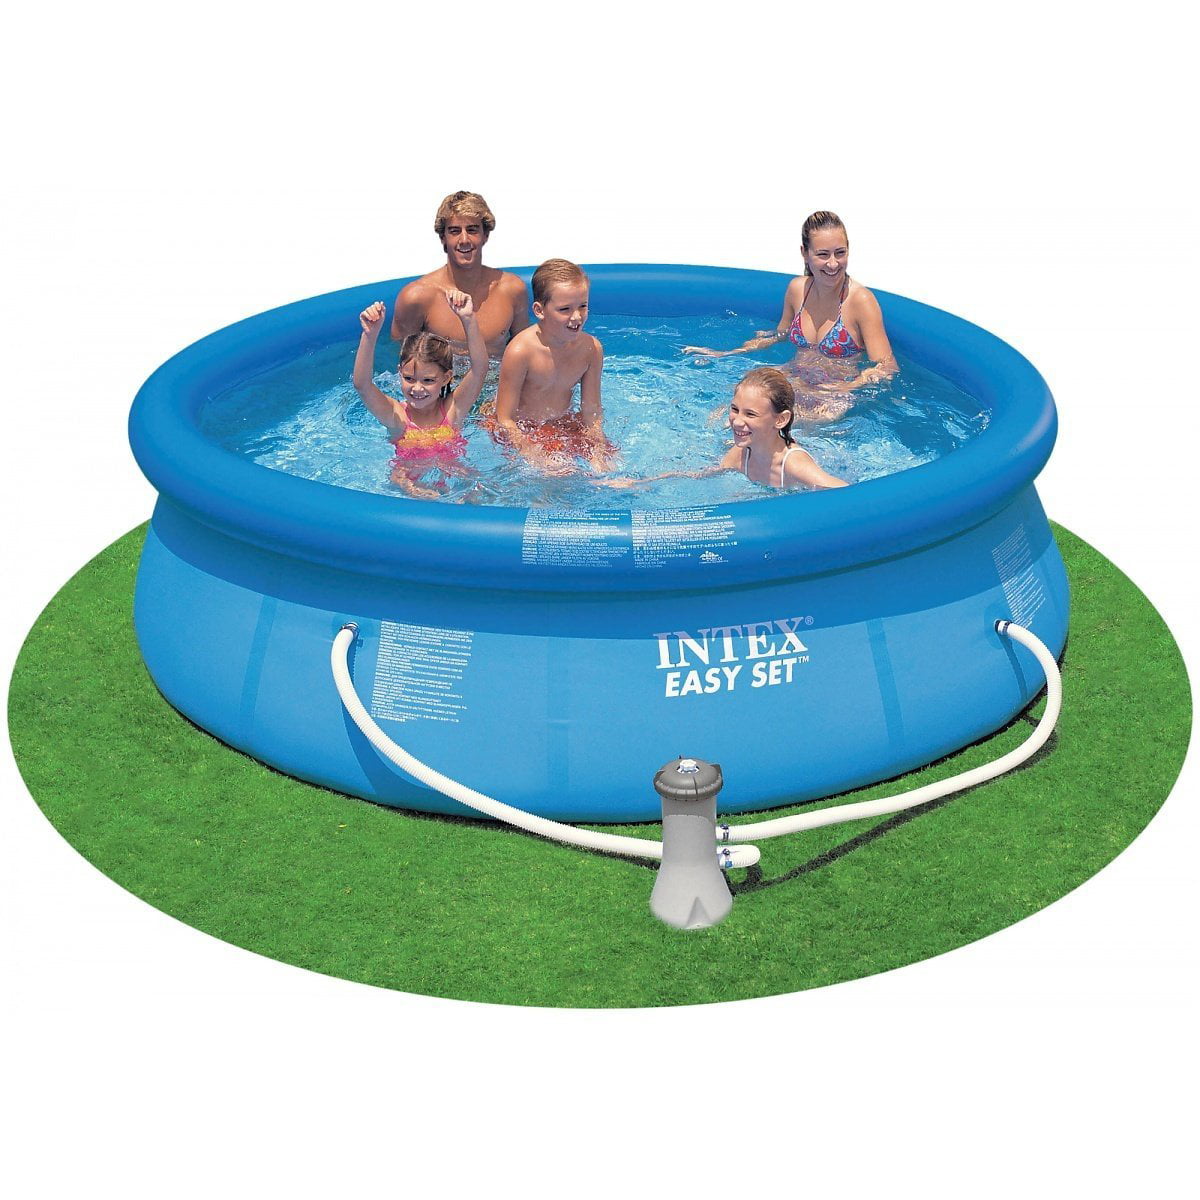 Summer Waves P10010305 10'x30" Quick Set Ring Swimming Pool for sale online 